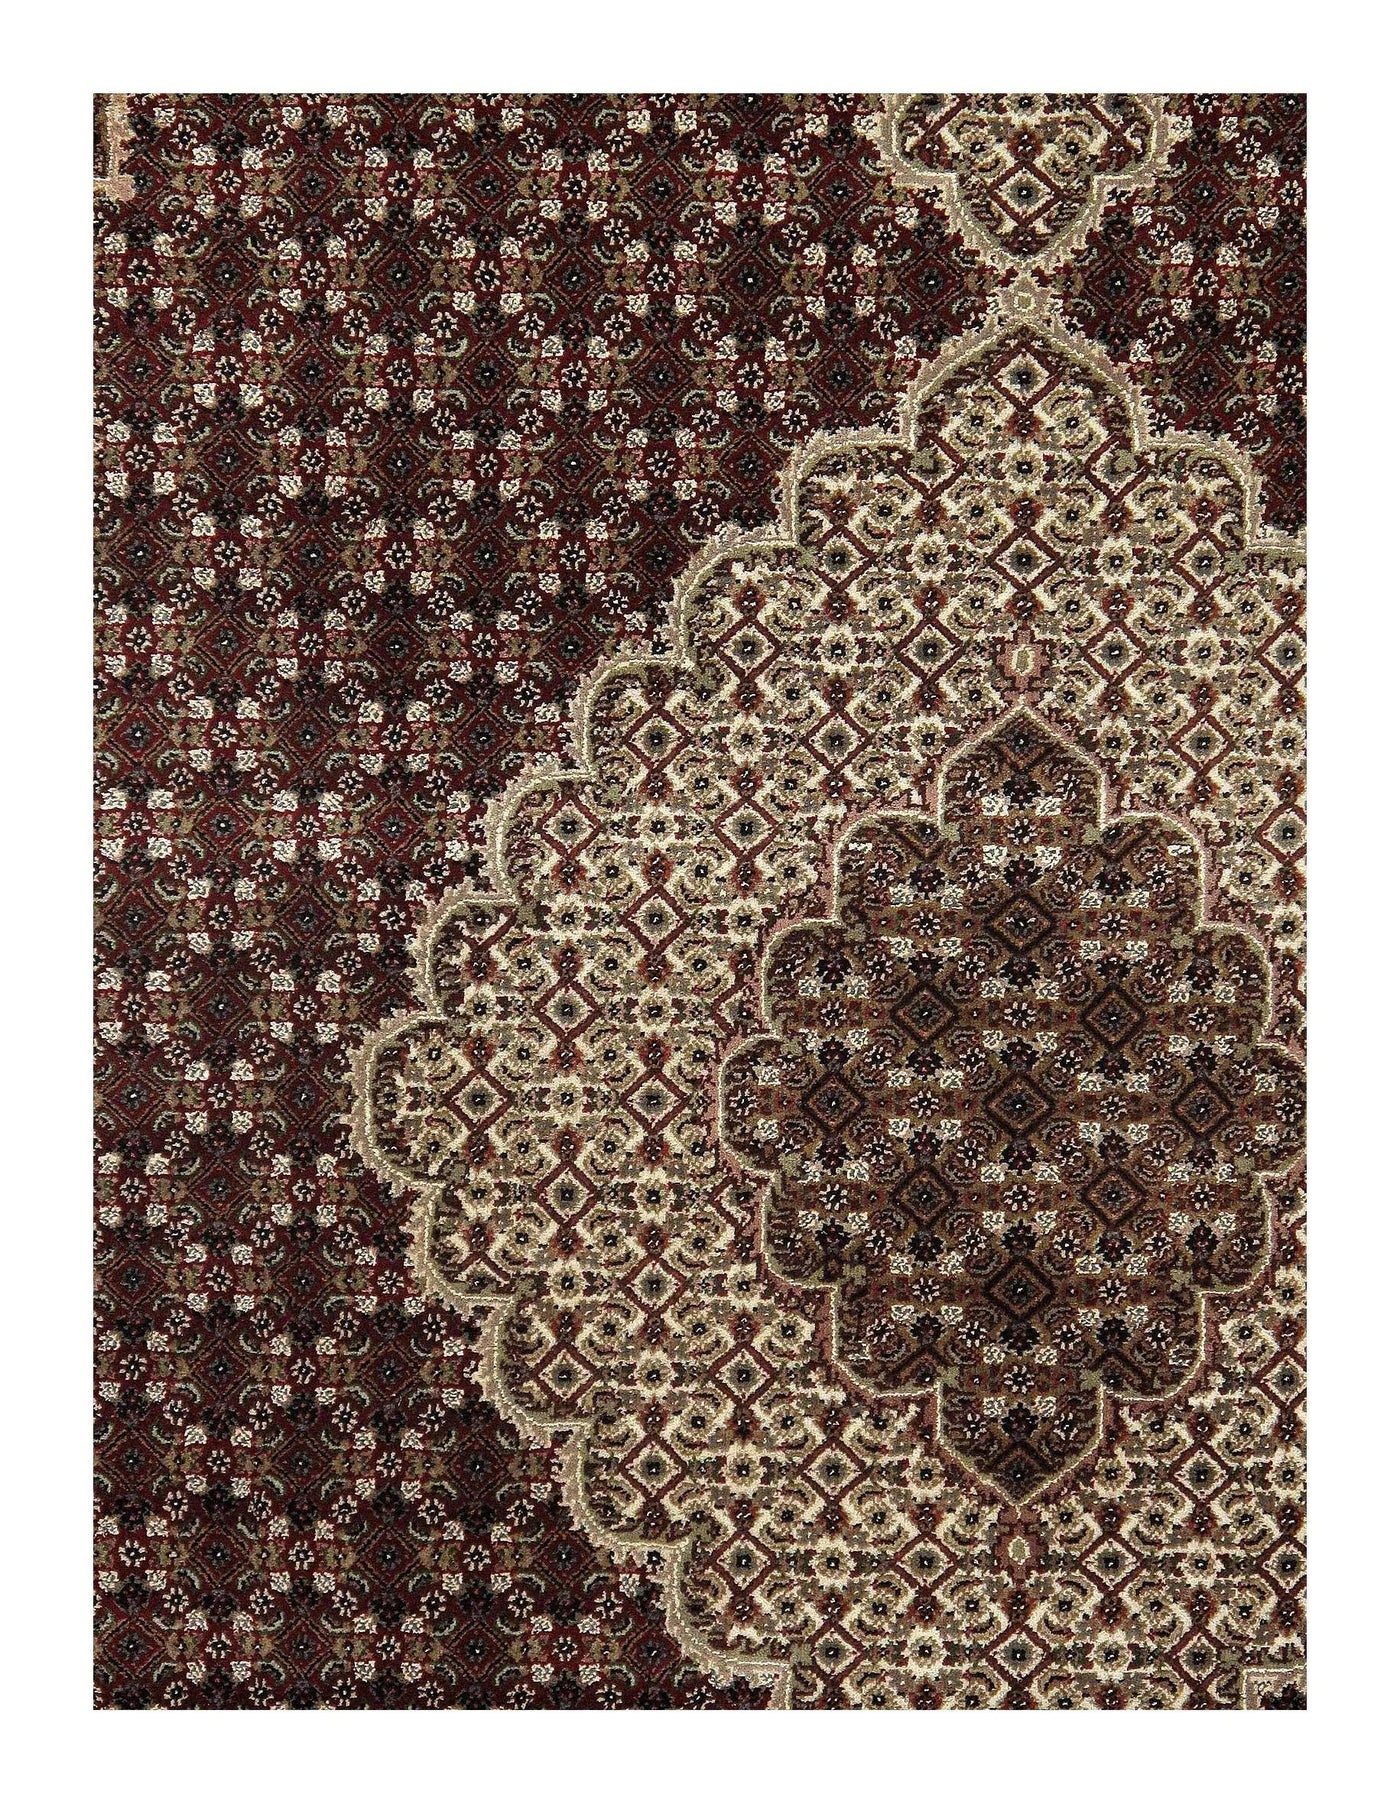 Canvello Red Tabriz Rug 8' X 10' canvellollc